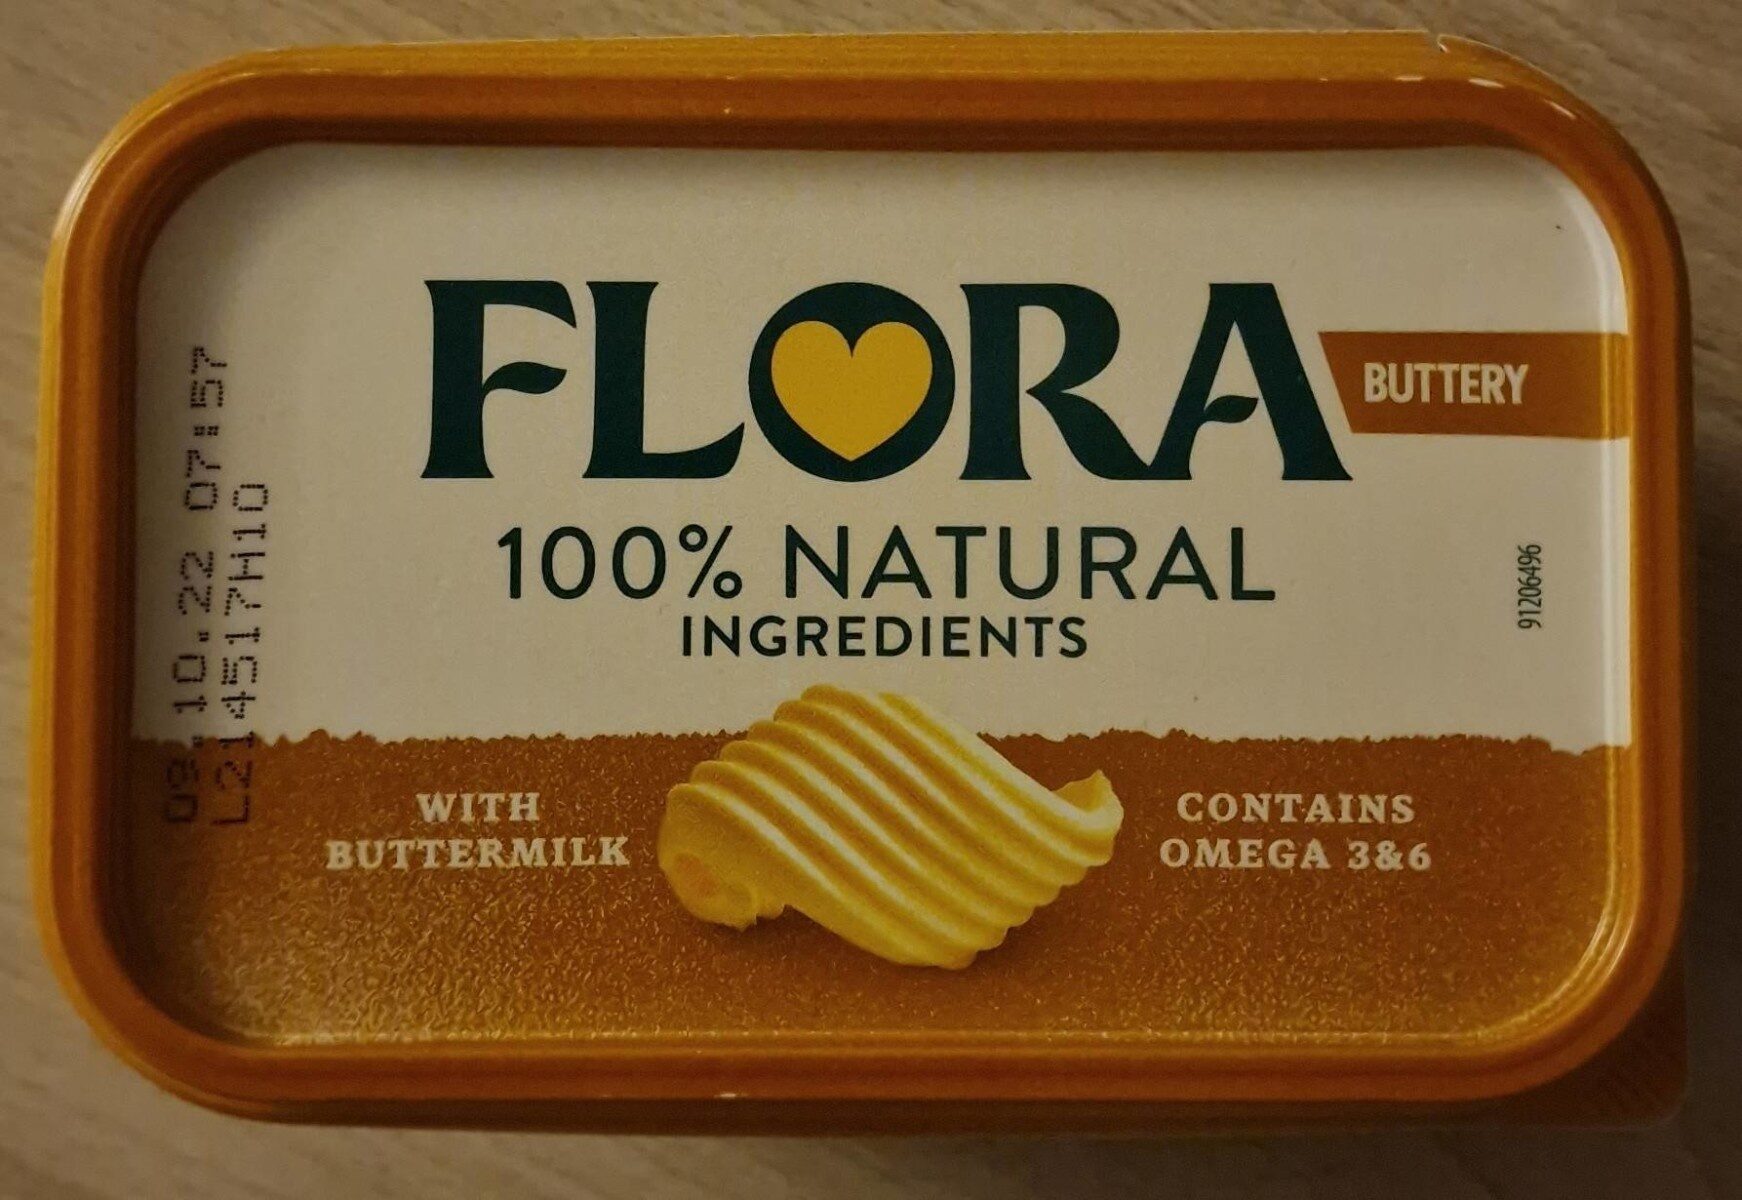 Buttery flora 100 Natural Ingredients - Product